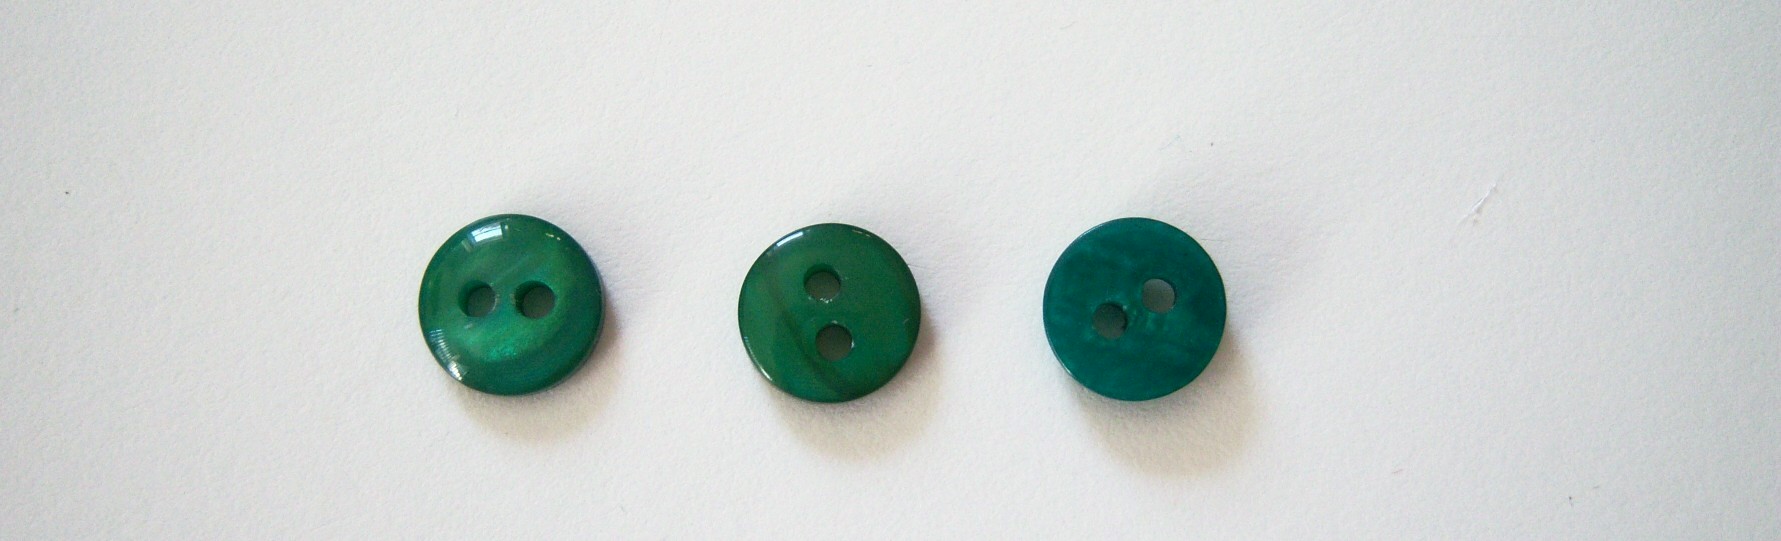 Green Pearlized 3/8" Poly 2 Hole Button